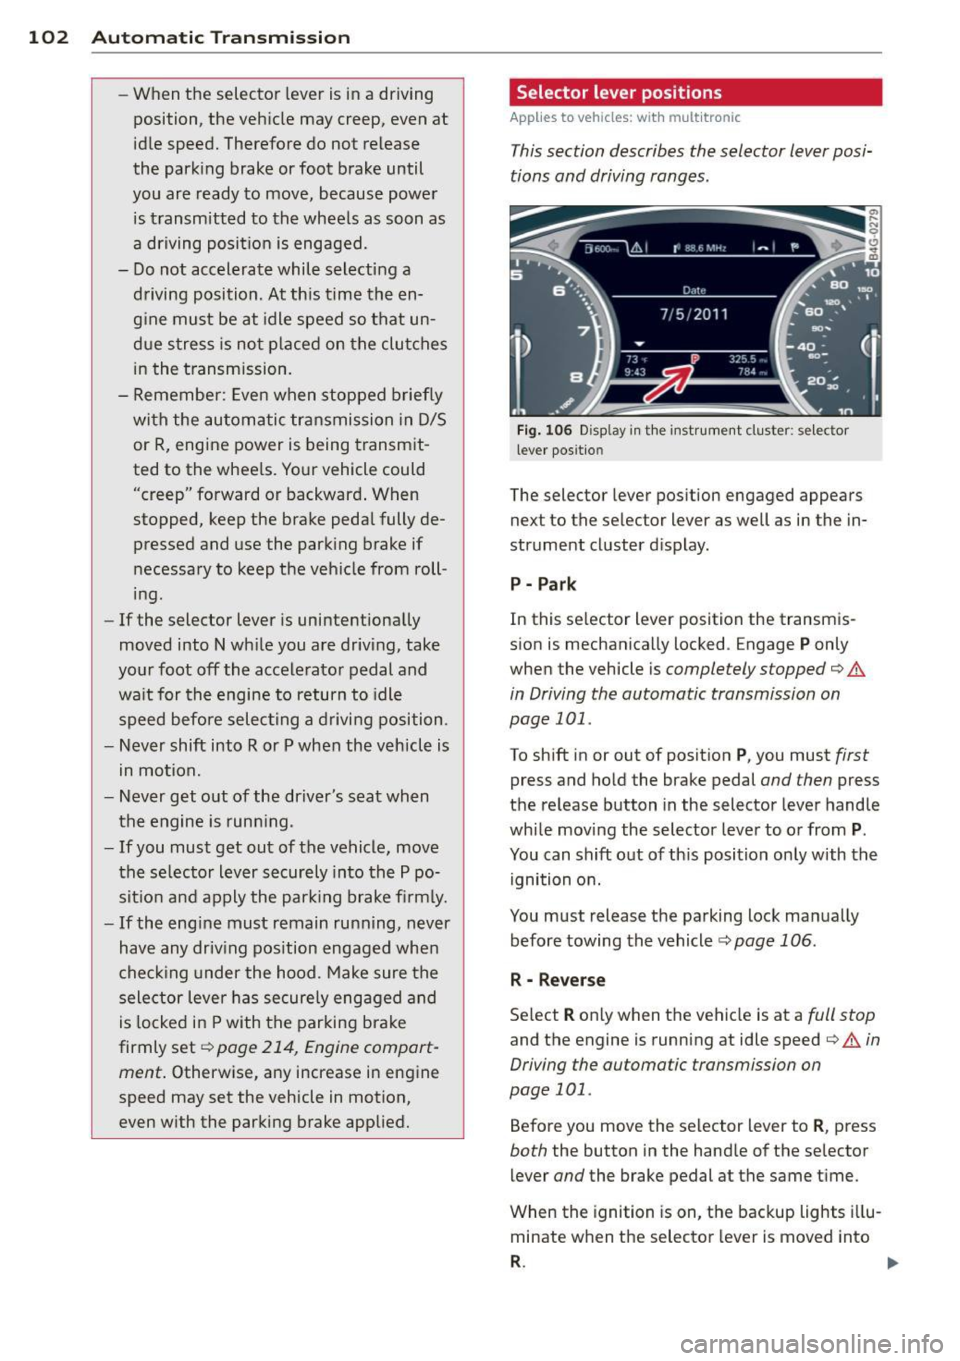 AUDI S6 2012  Owners Manual 102  Autom atic  Tran smi ssi on 
-When  the  selector  lever  is  in a  driving 
position,  the  veh icle  may  creep,  even  at 
id le speed.  Therefore  do  not  release 
the  park ing  brake  or f